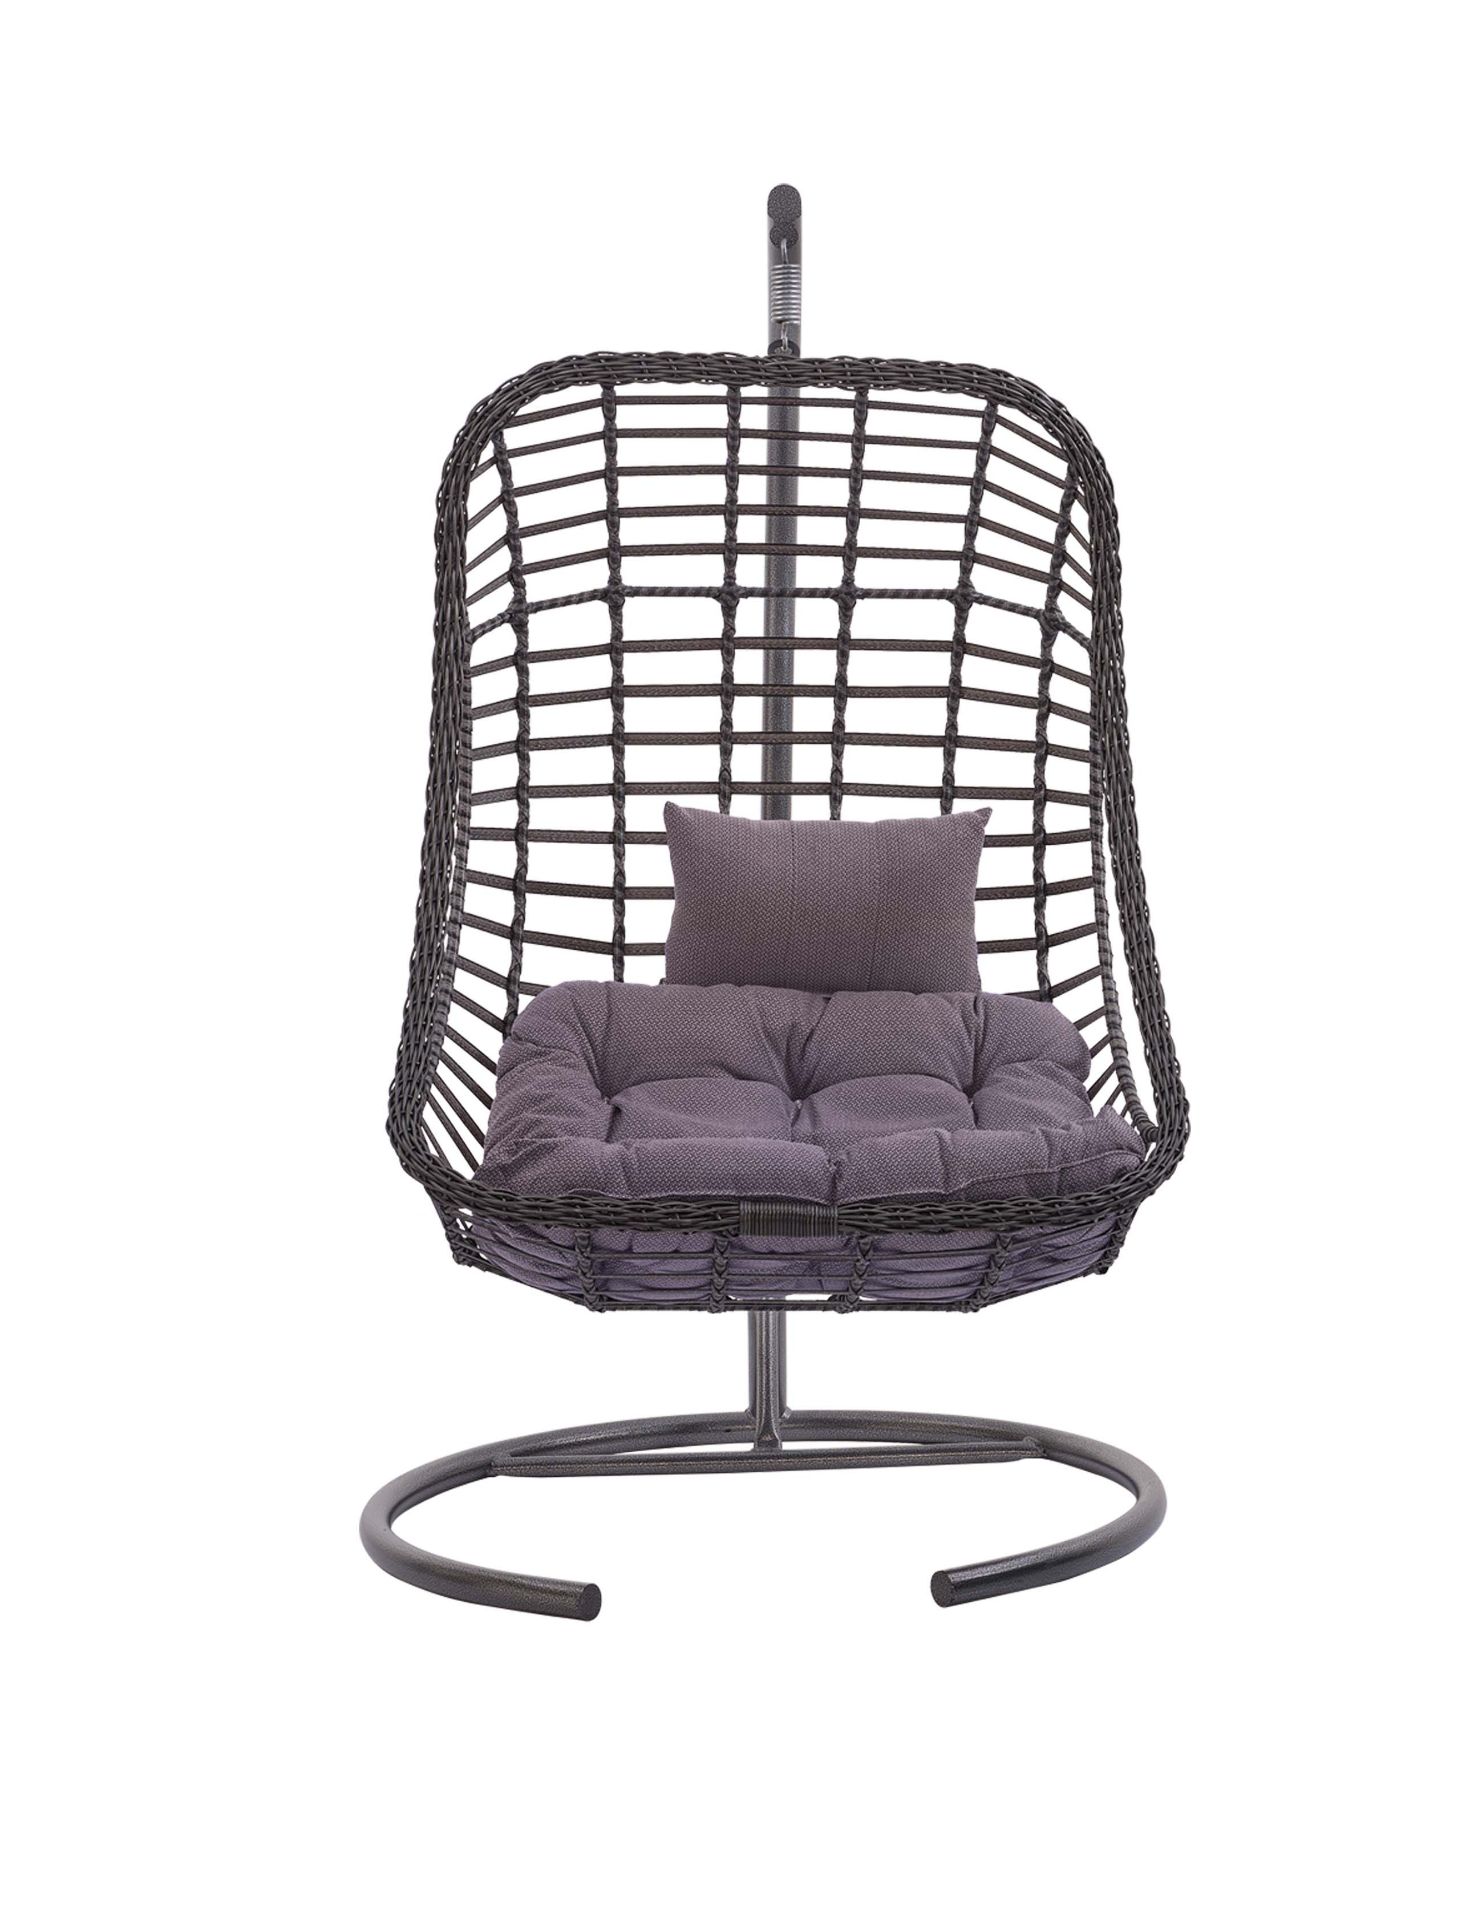 + VAT Brand New Chelsea Garden Company Rattan Single Hanging Swing Chair - Item Is Available Approx